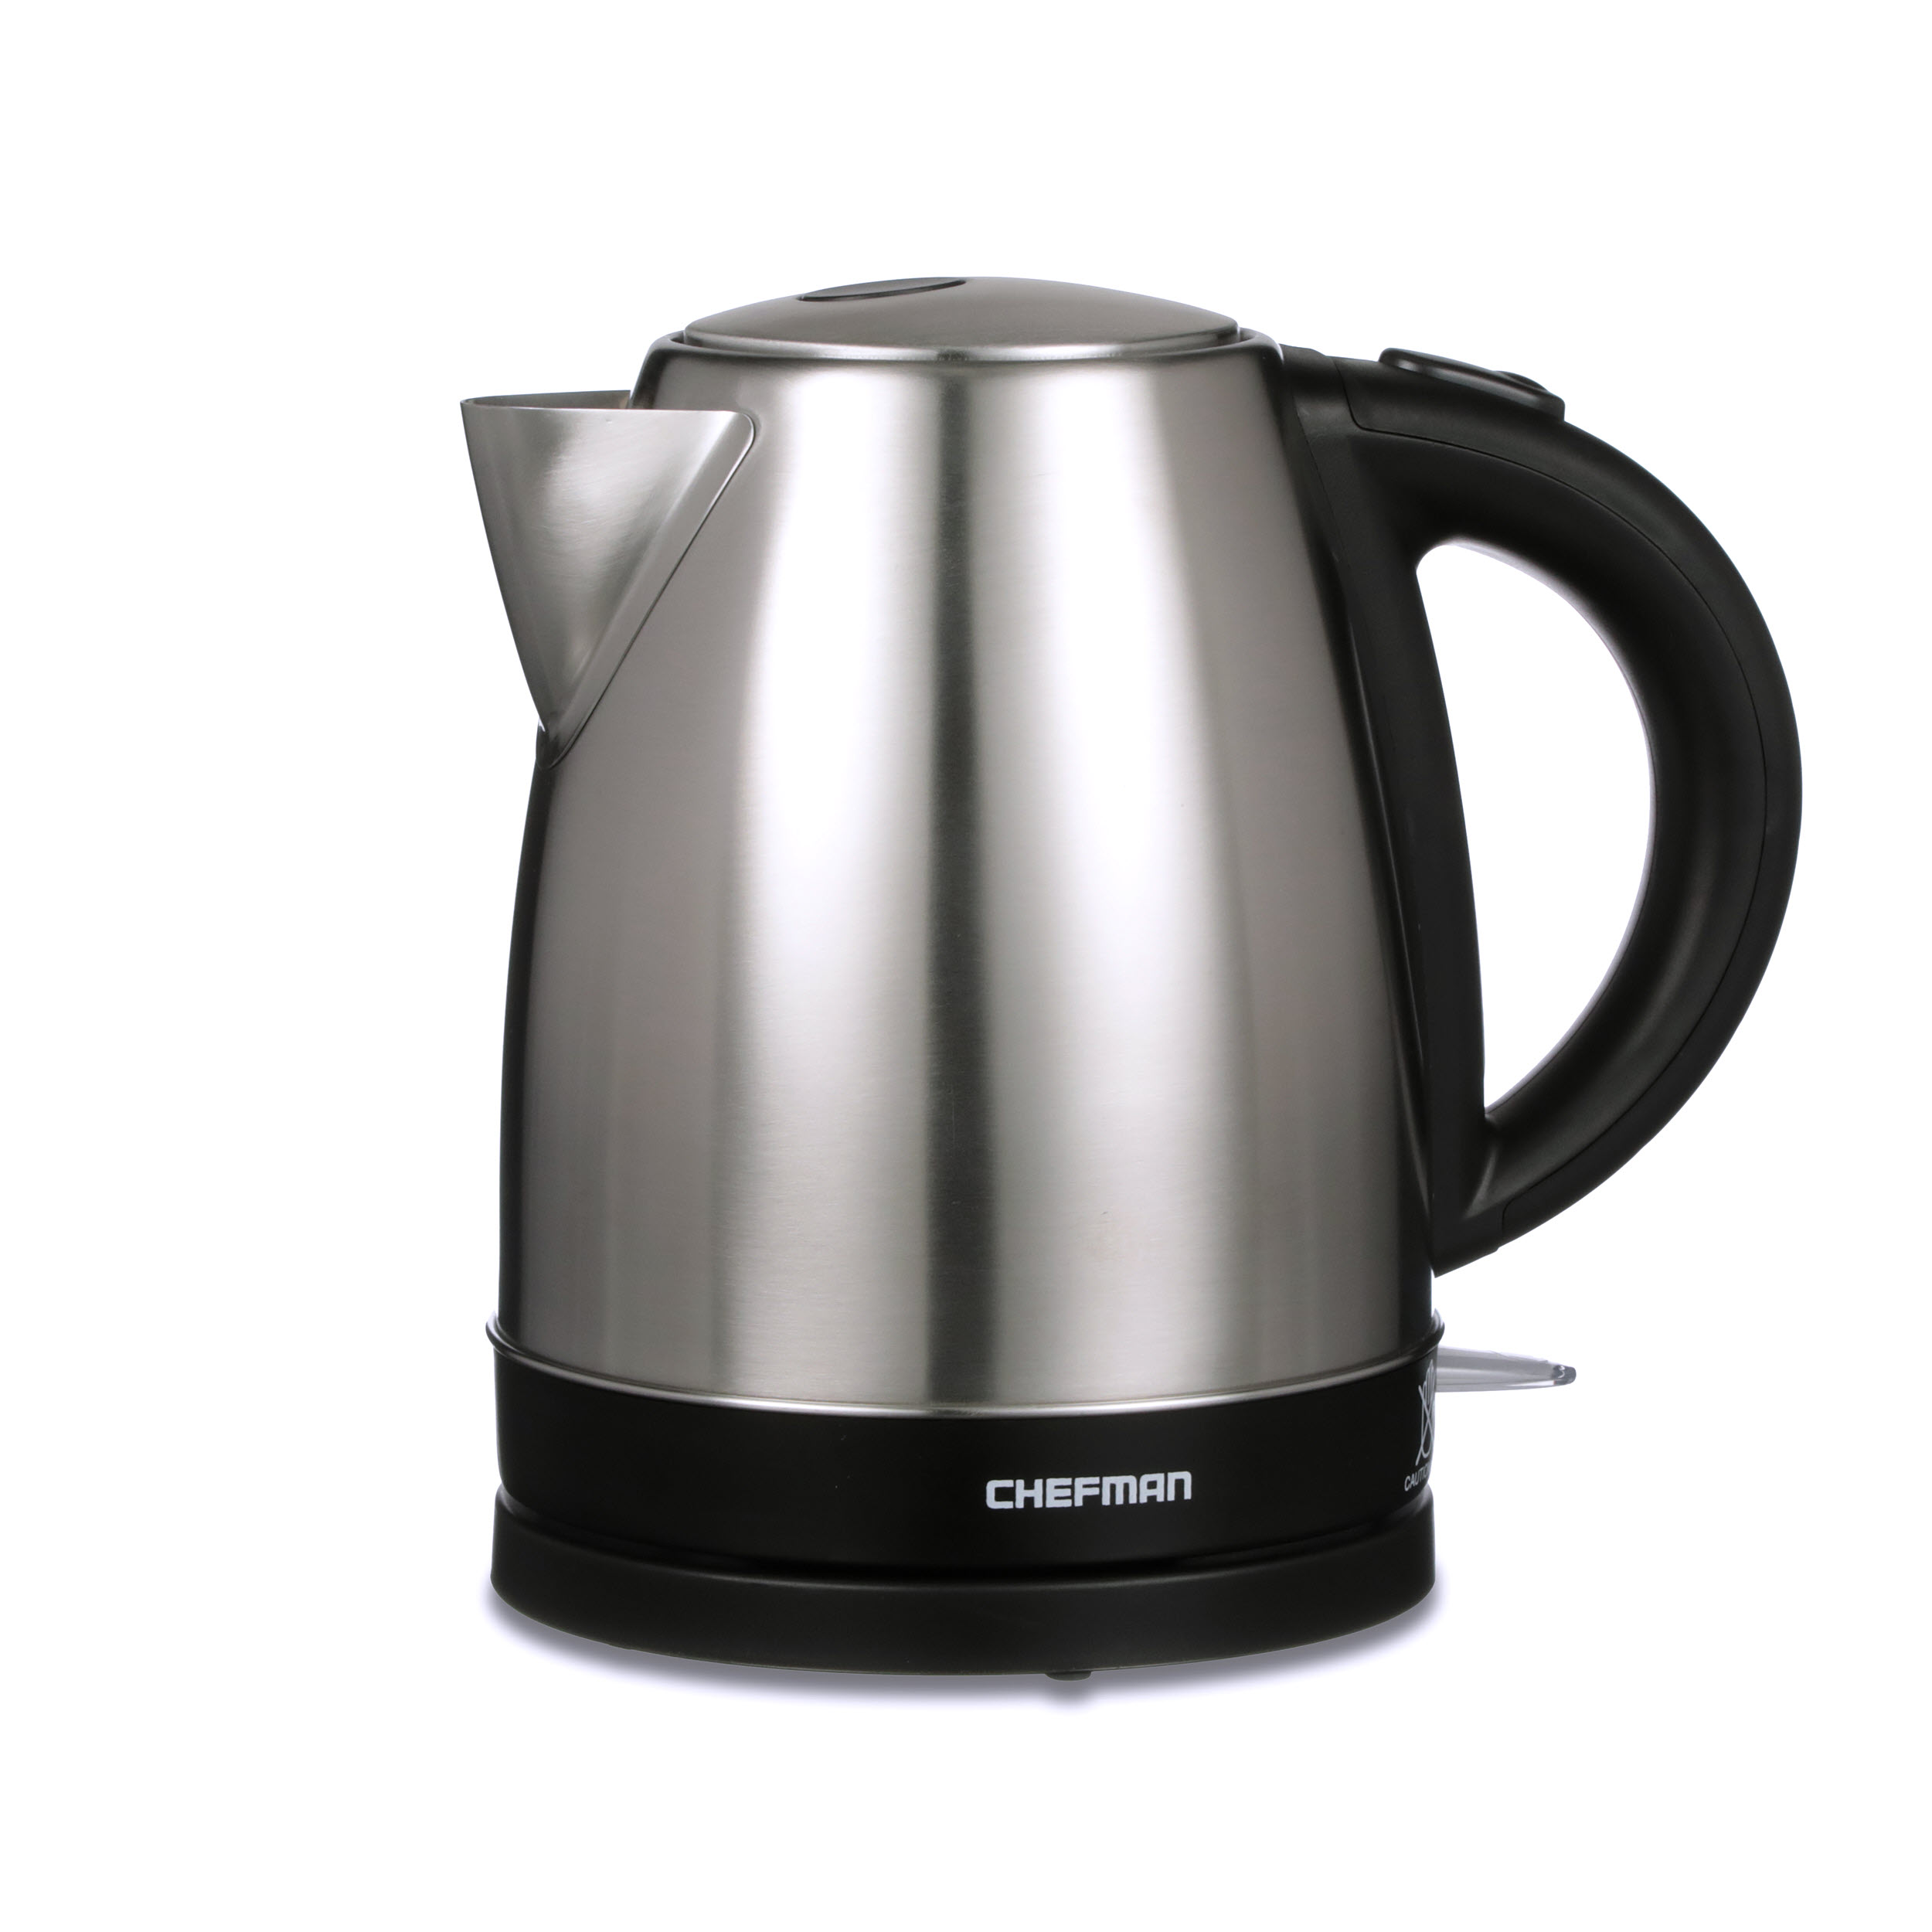 Chefman Stainless Steel Electric Kettle 1.7 L